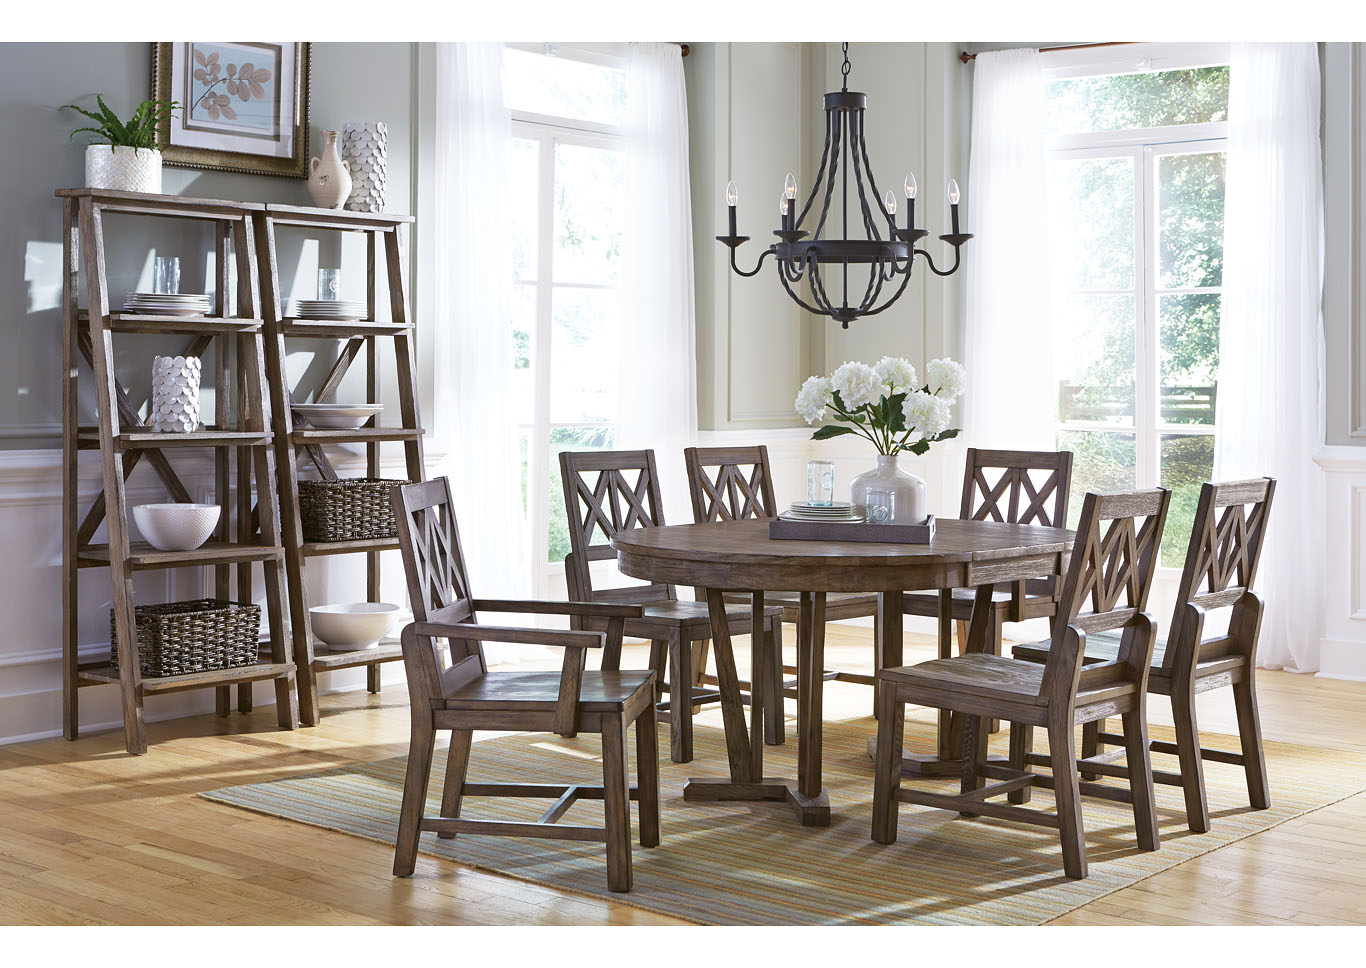 Foundry Driftwood Oval Dining Set w/4 Wood Side Chairs & 2 Wood Arm Chairs,Kincaid